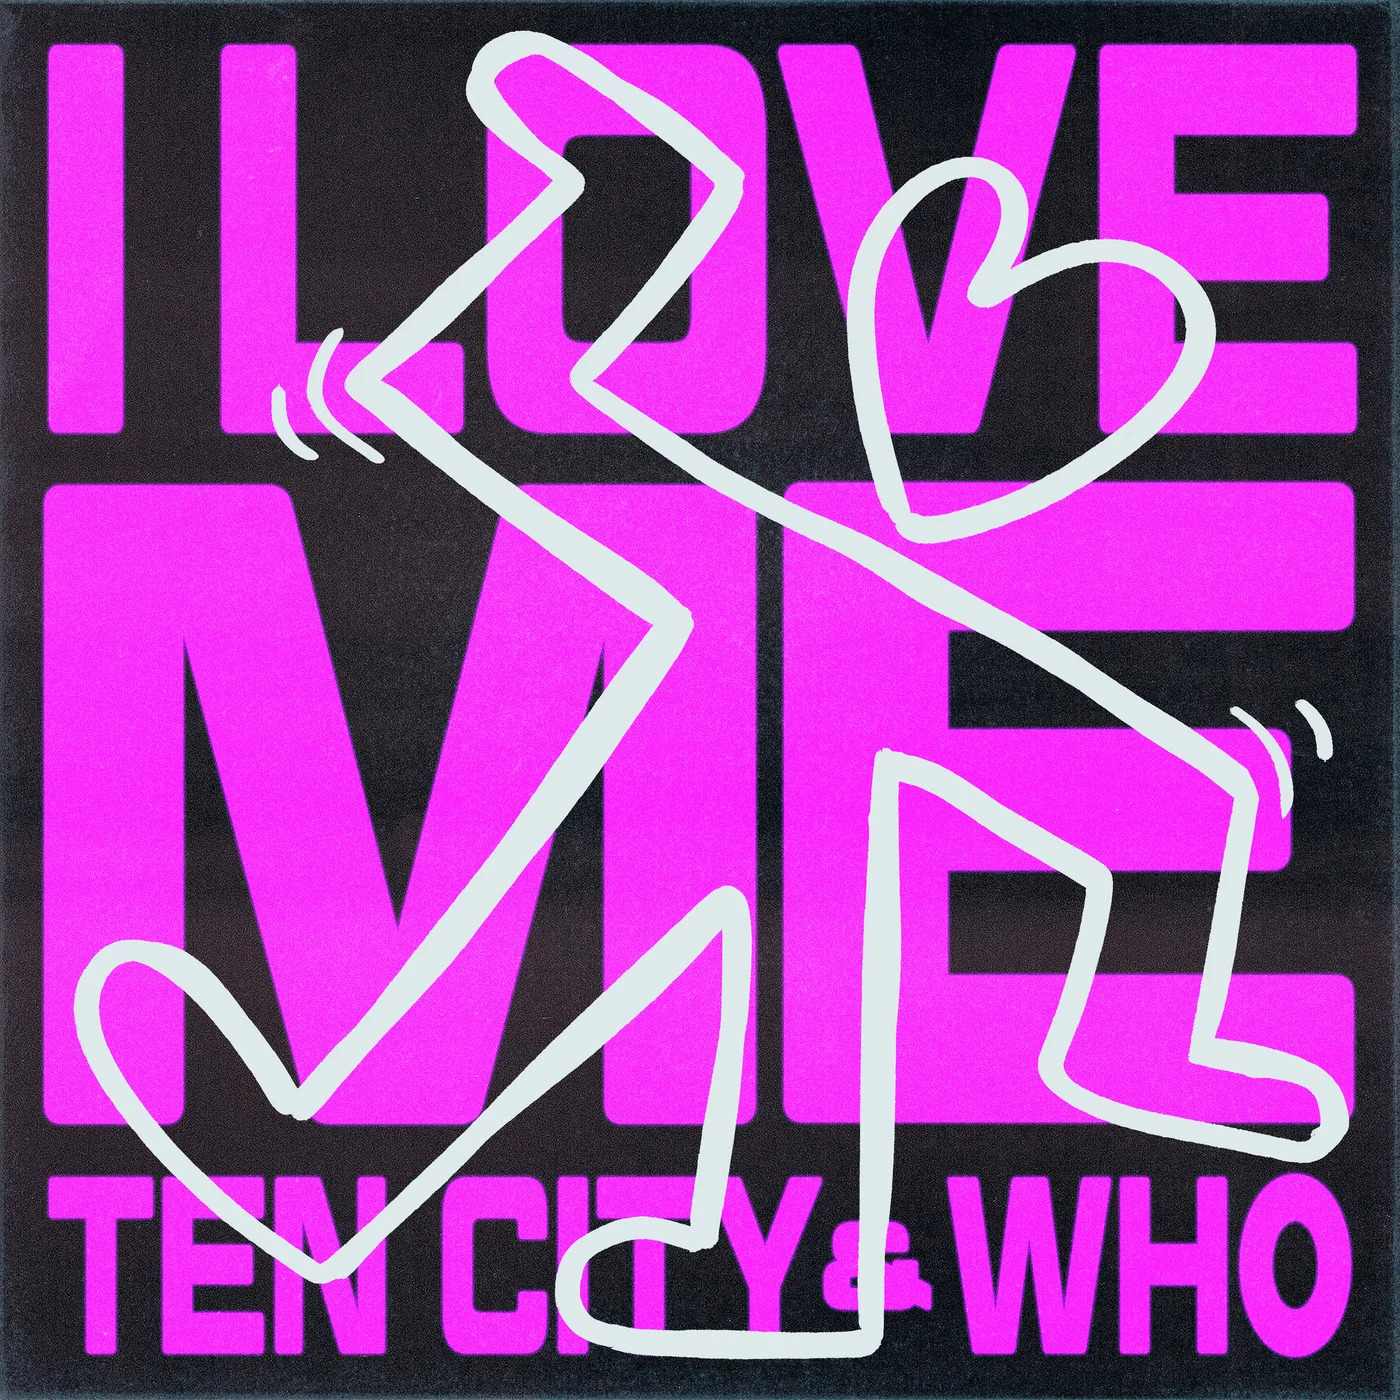 Wh0 & Ten City feat. Marshall Jefferson - I Love Me (Extended Mix)